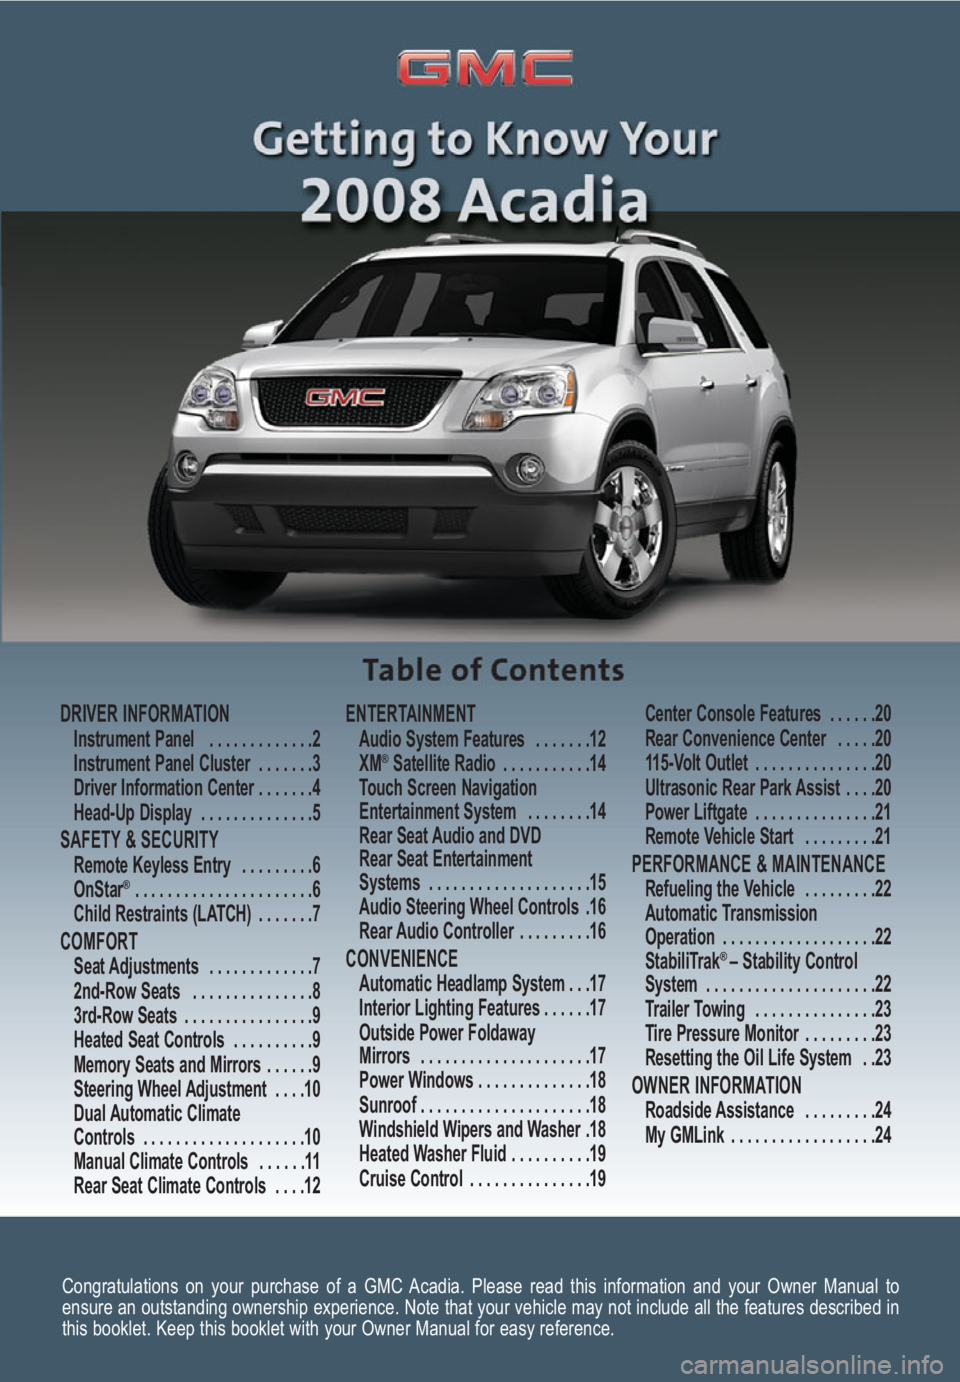 GMC ACADIA 2008  Get To Know Guide Congratulations on your purchase of a GMC Acadia. Please read this information and your Owner Manual to
ensure an outstanding ownership experience. Note that your vehicle may not include all the featu